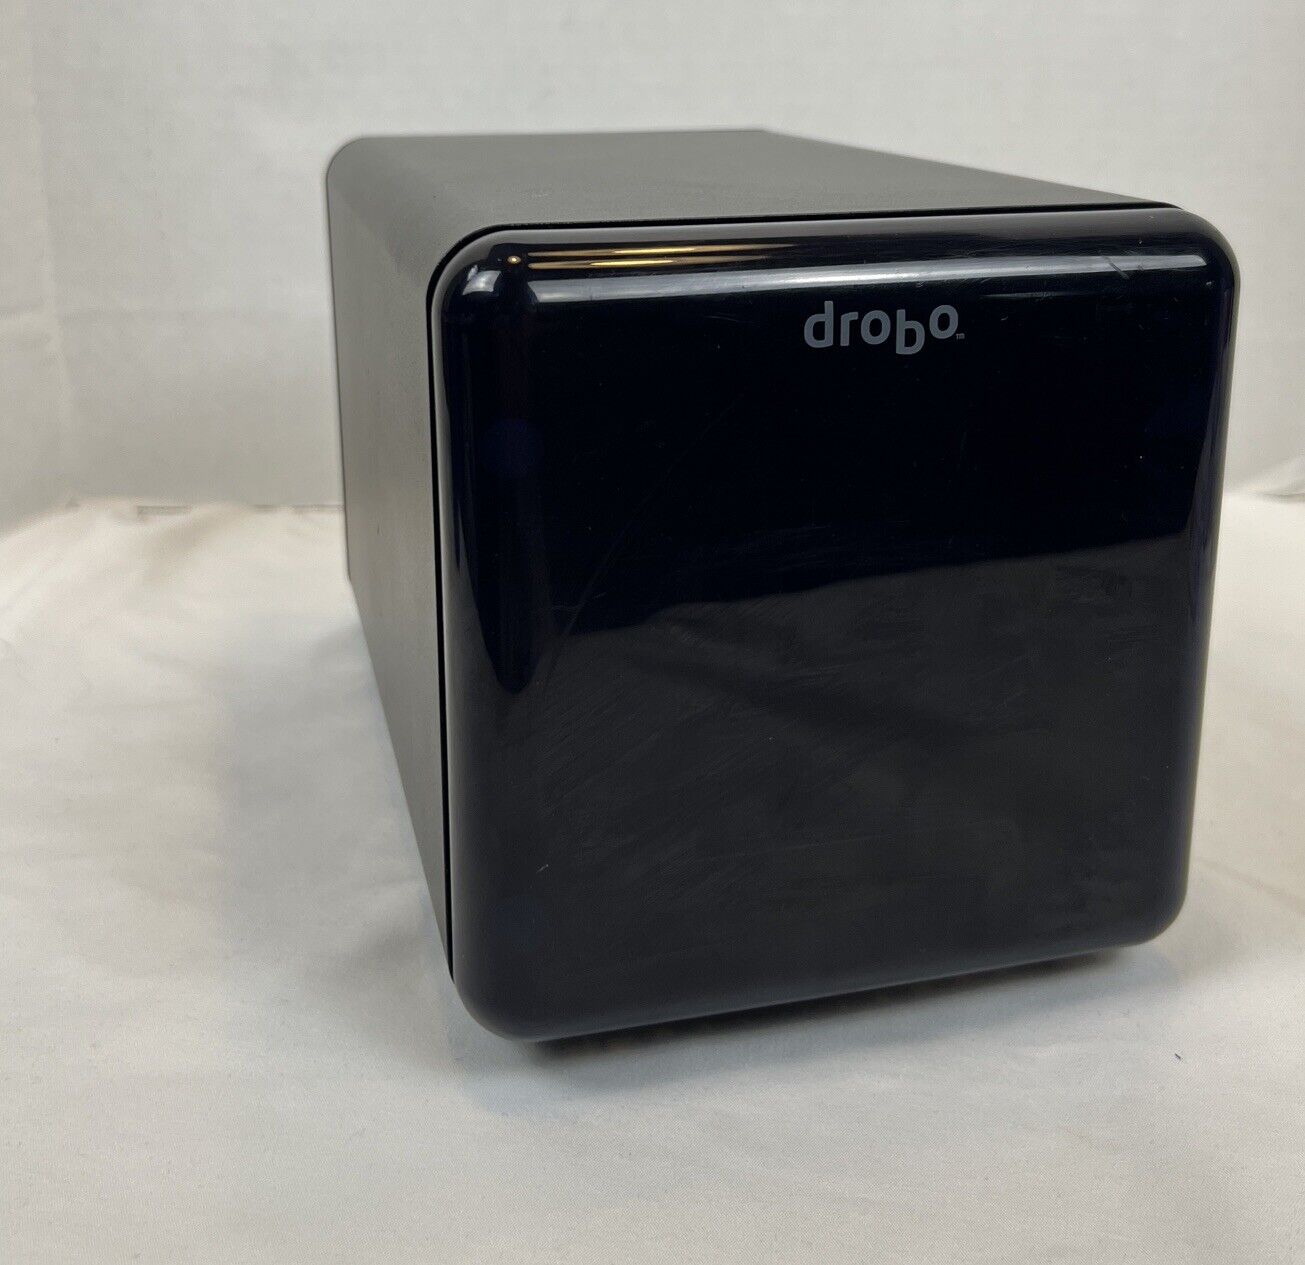 Drobo Dro4d-d Drive Network Attached Storage (NAS) No DRIVES- TESTED